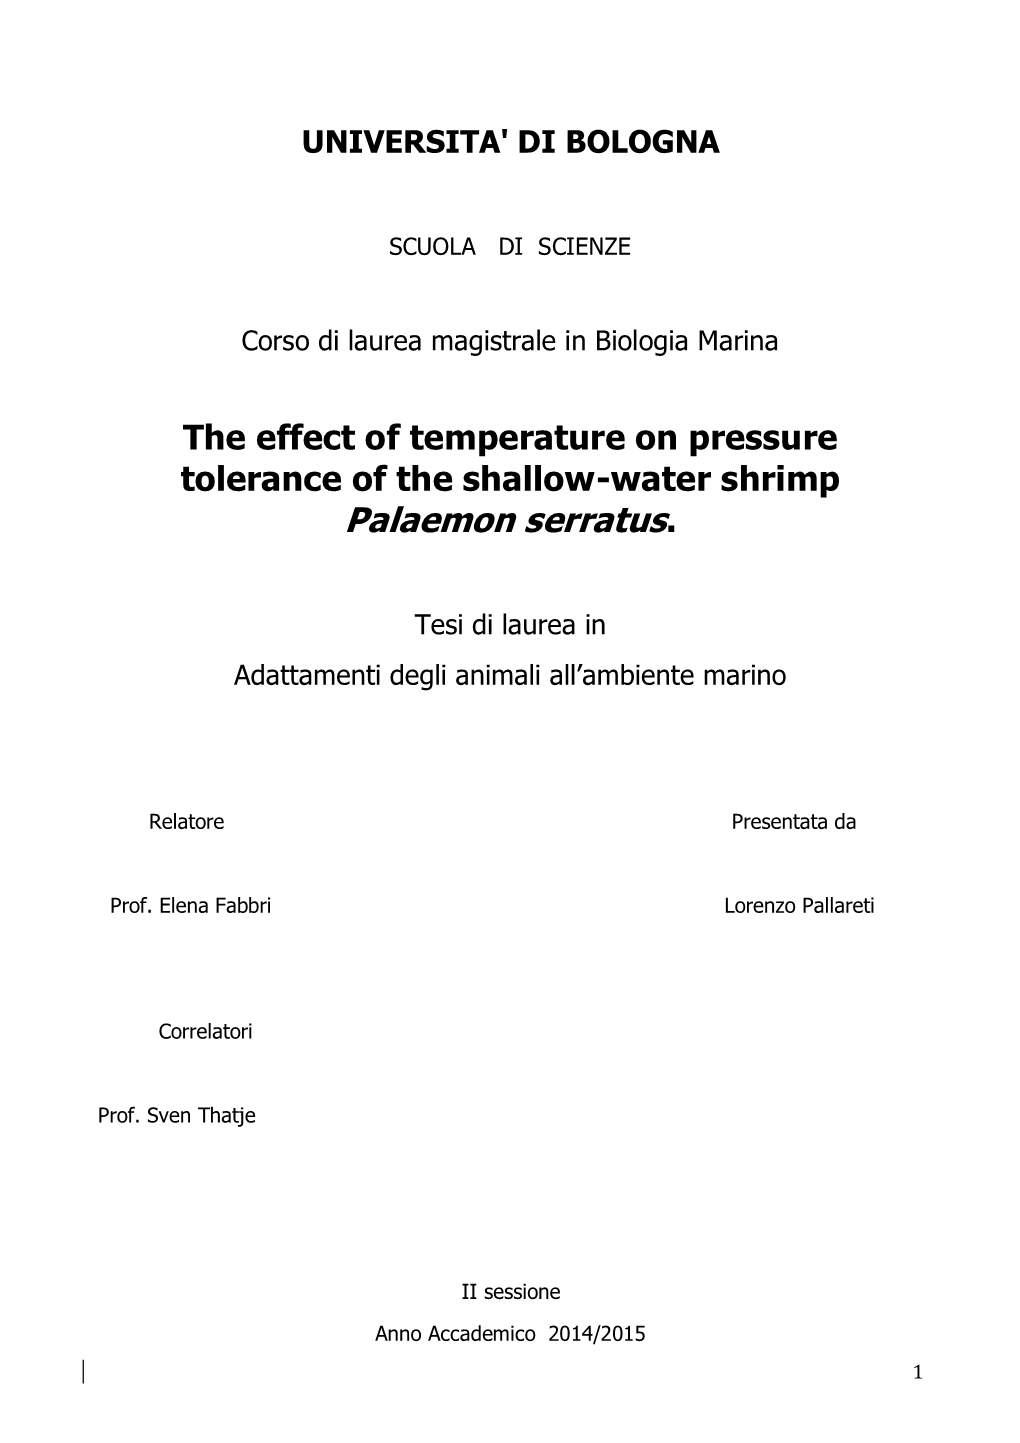 The Effect of Temperature on Pressure Tolerance of the Shallow-Water Shrimp Palaemon Serratus